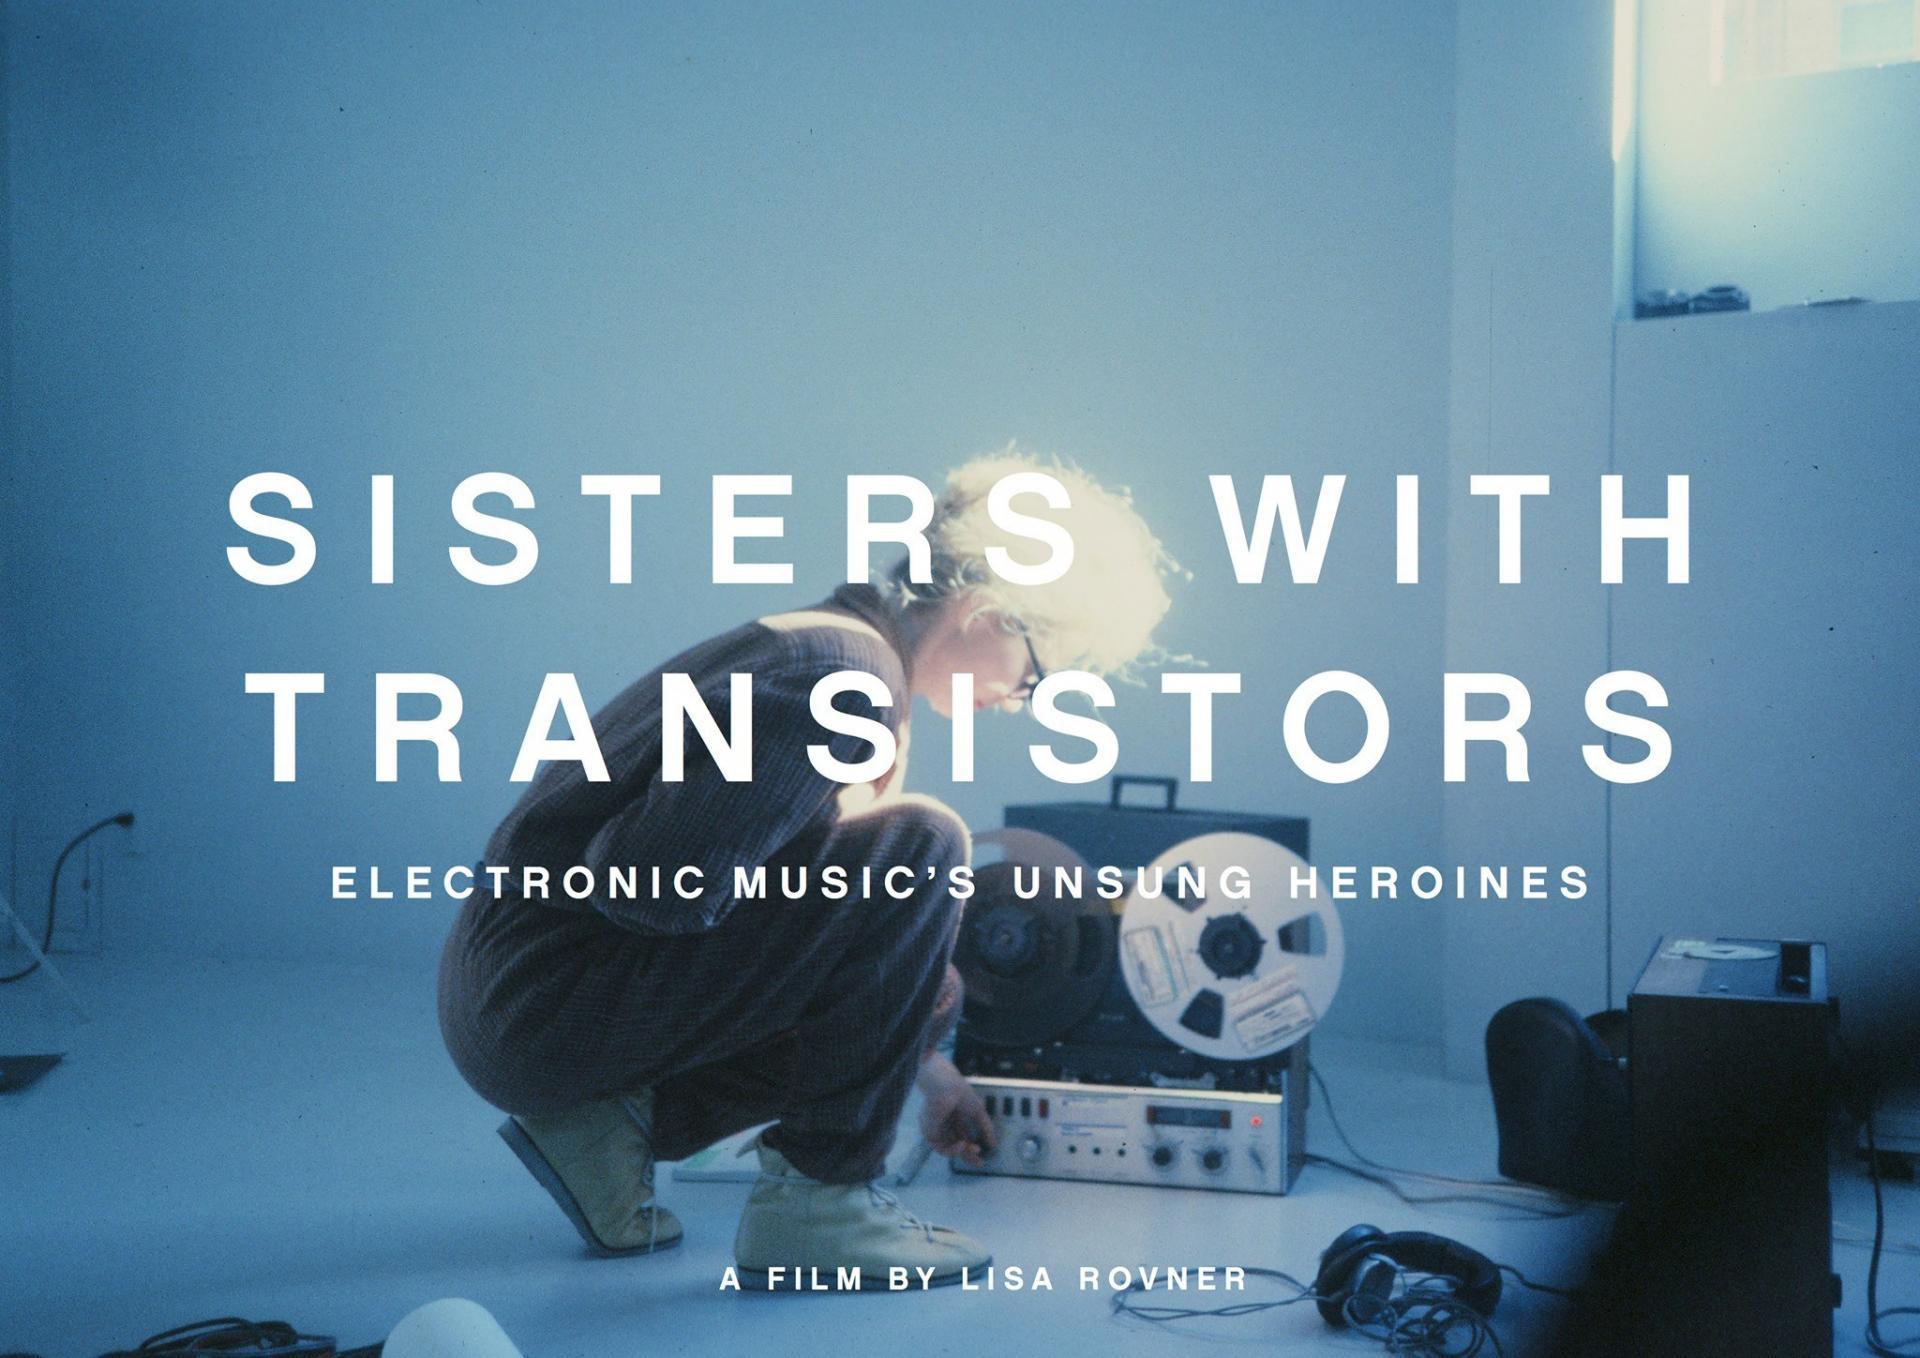 Sisters with Transistors – donne ed elettronica